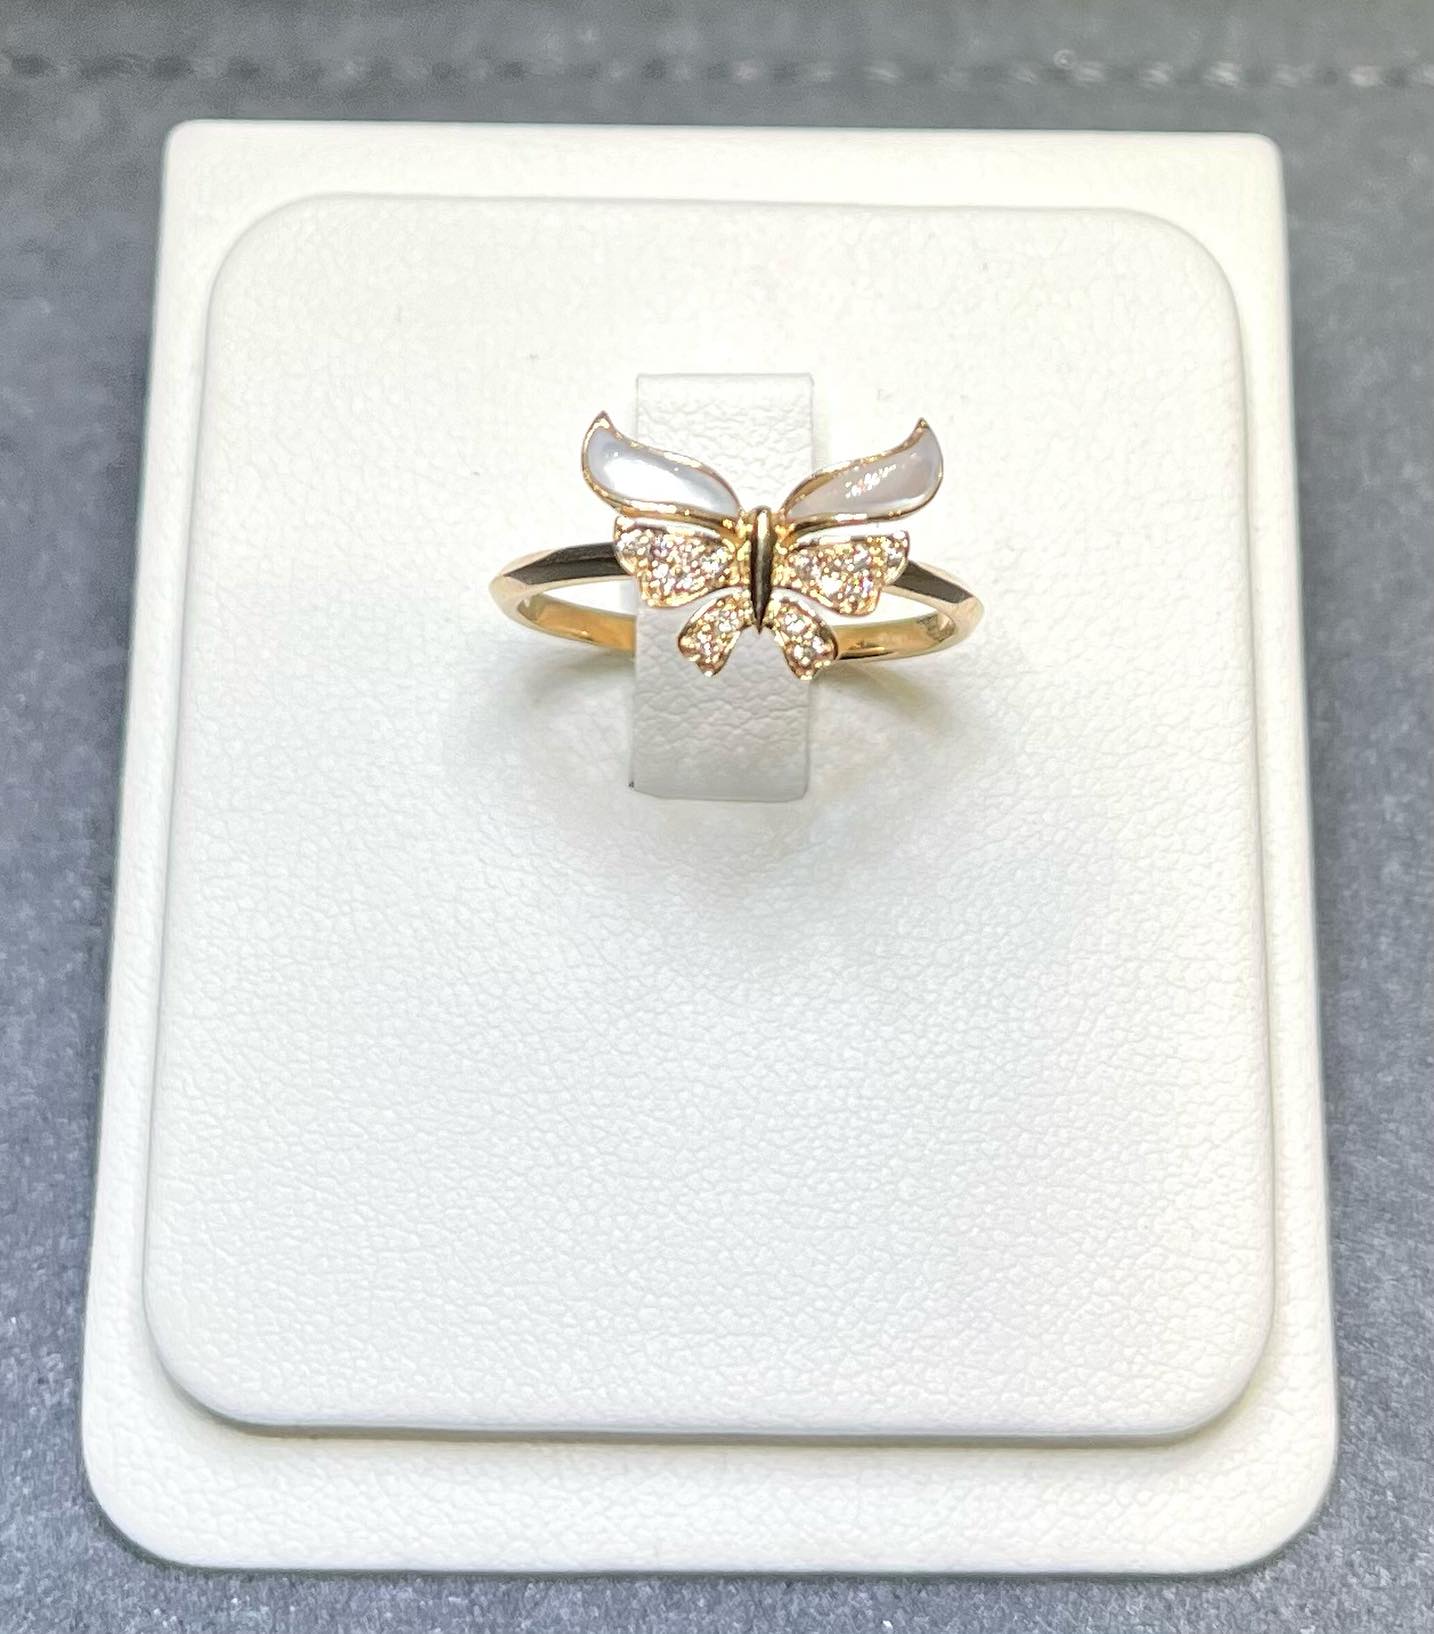 Gold diamond butterfly ring in a white ring holder